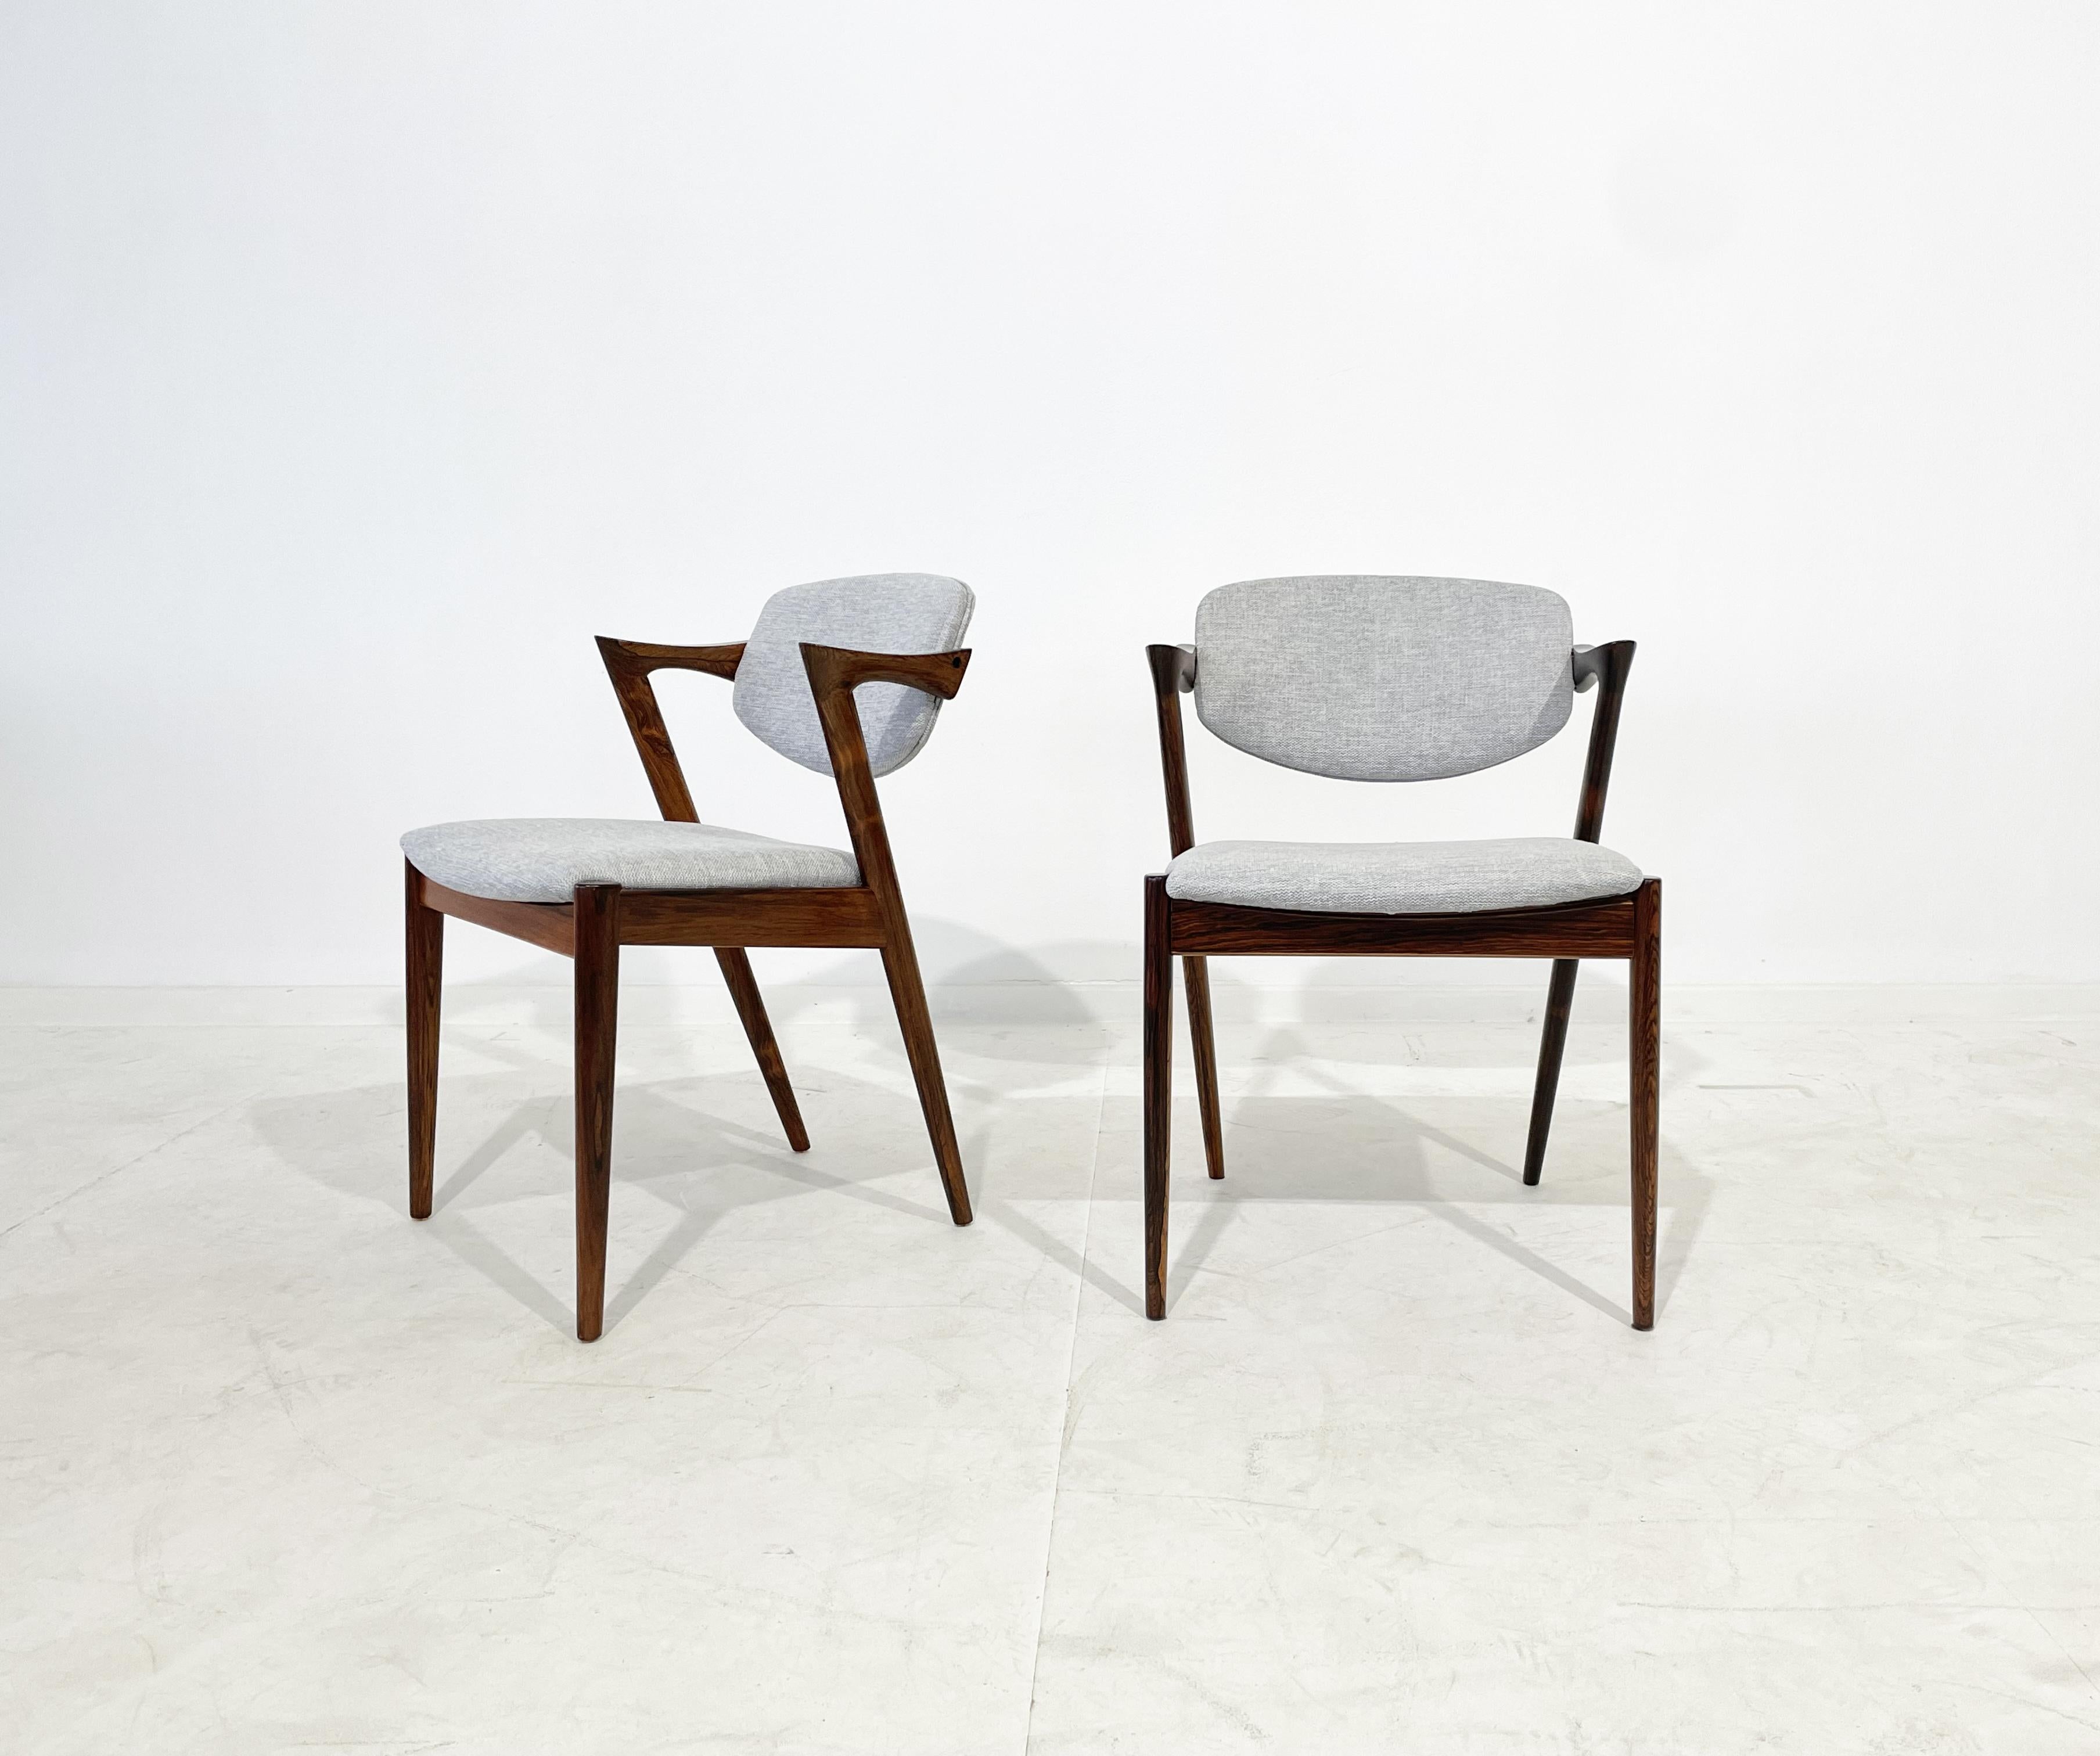 Kai Kristiansen dinning chairs model 42.
Designer: Kai Kristiansen.
Production: Schou Andersen.
Origin: Denmark.
Period: 1960s
Material: rosewood and fabric
Dimensions:75 cm hight x 54 cm width x 56 cm depth

The chairs were fully restored and